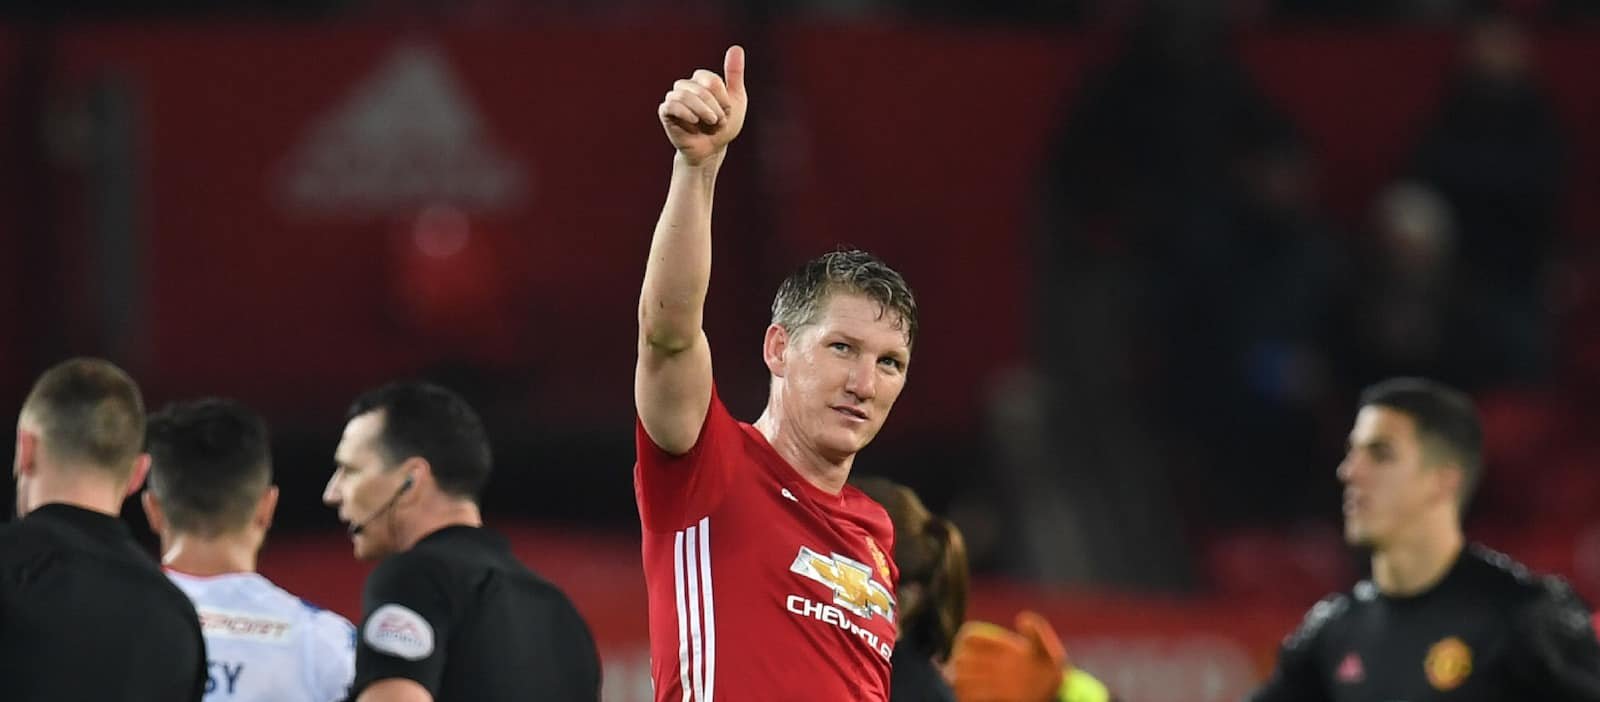 Bastian Schweinsteiger opens up on relationship with Jose Mourinho during Manchester United stint – Man United News And Transfer News